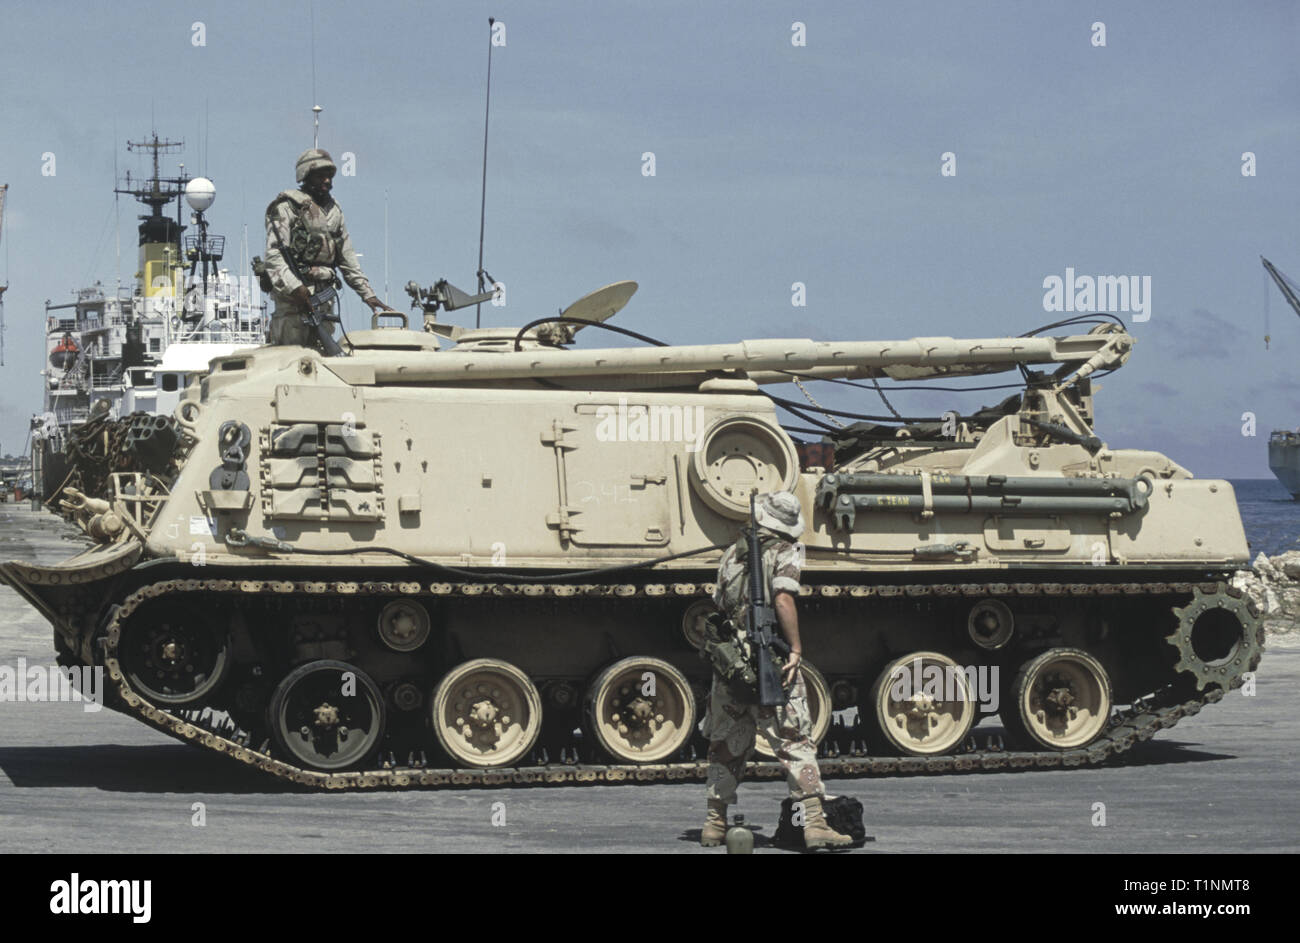 29th October 1993 A U.S. Army M88 recovery vehicle of the 24th Infantry Division, 1st Battalion of the 64th Armored Regiment, just arrived by sea, in the new port in Mogadishu, Somalia. Stock Photo